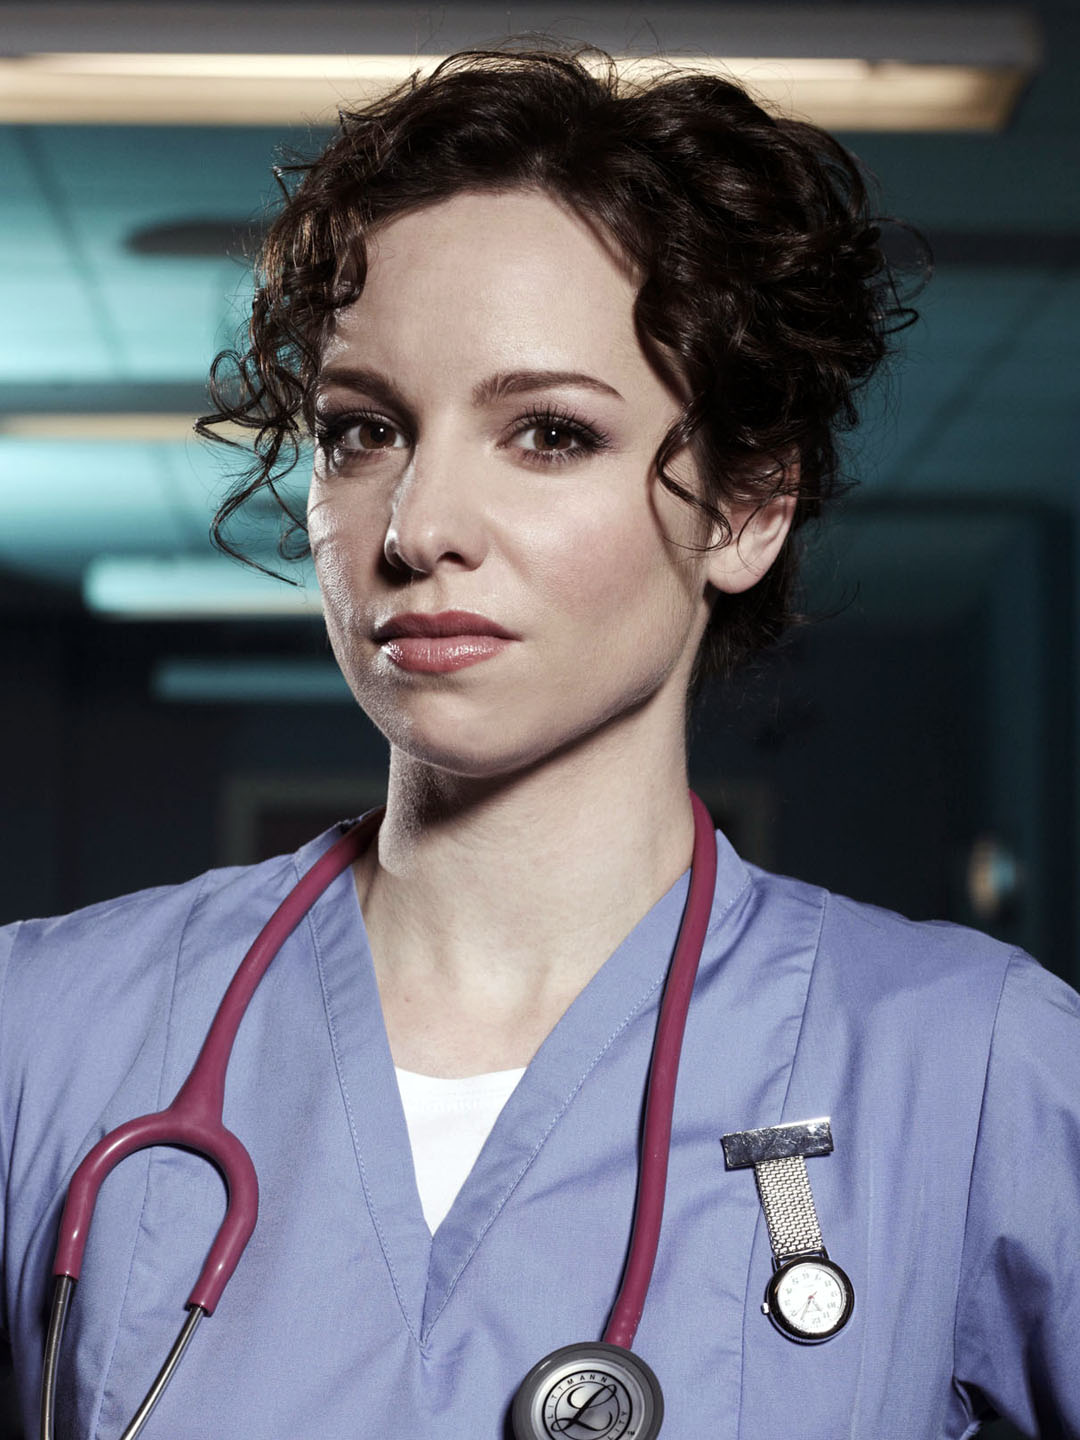 Kirsty Clements | Casualty Central | FANDOM powered by Wikia1080 x 1440